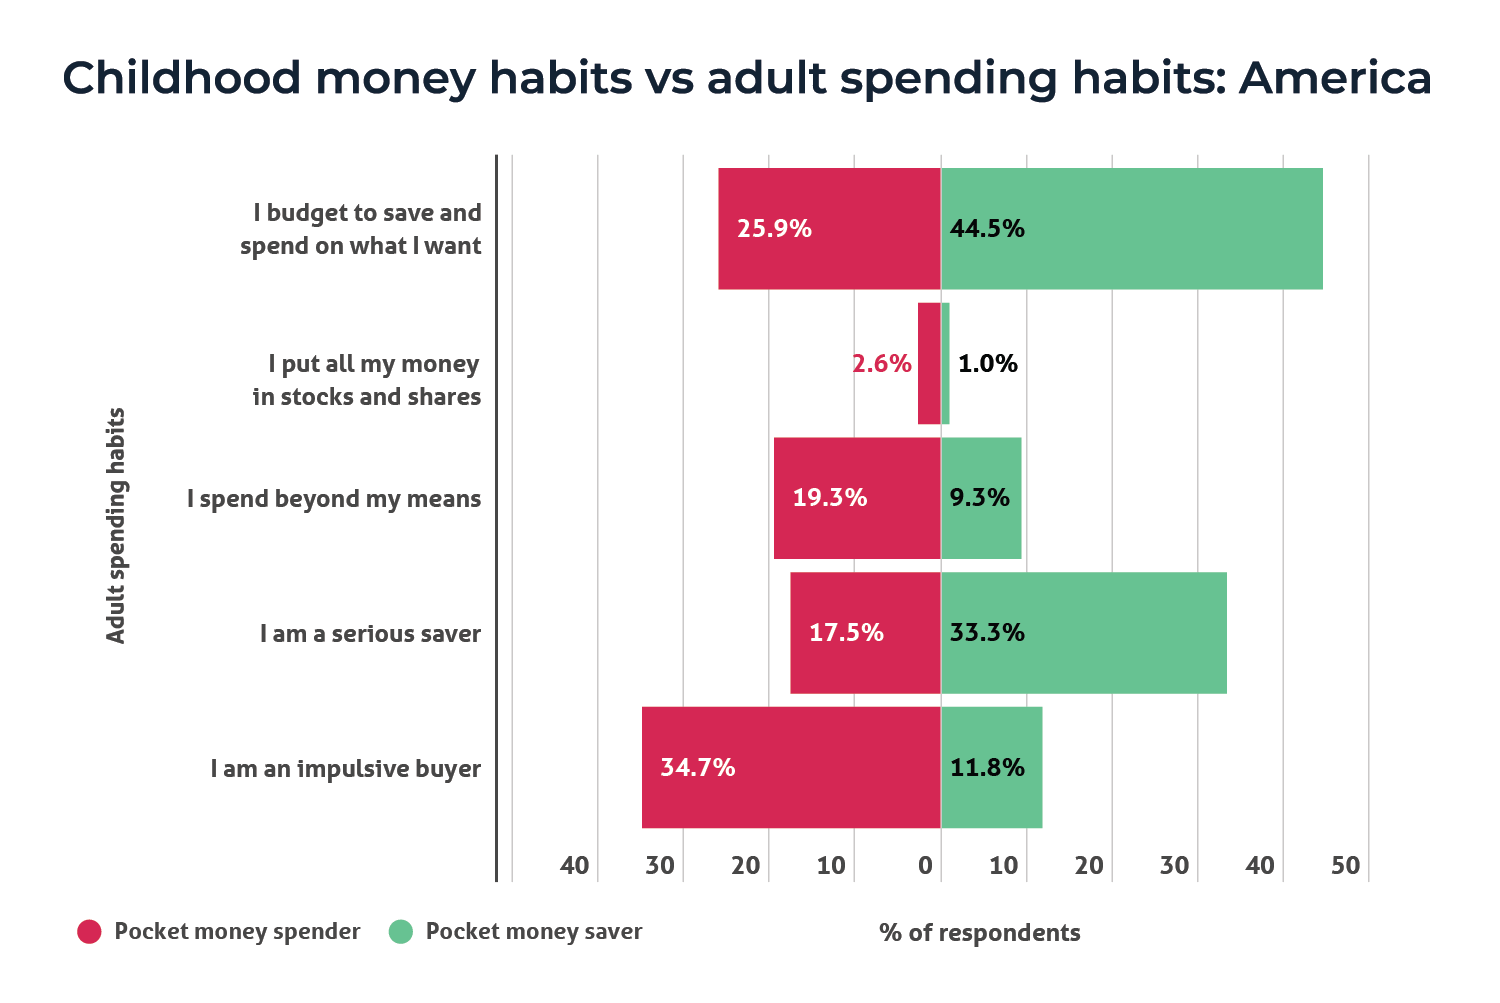 A bar chart showing the difference in American spending habits between those who saved pocket money and those who spent it